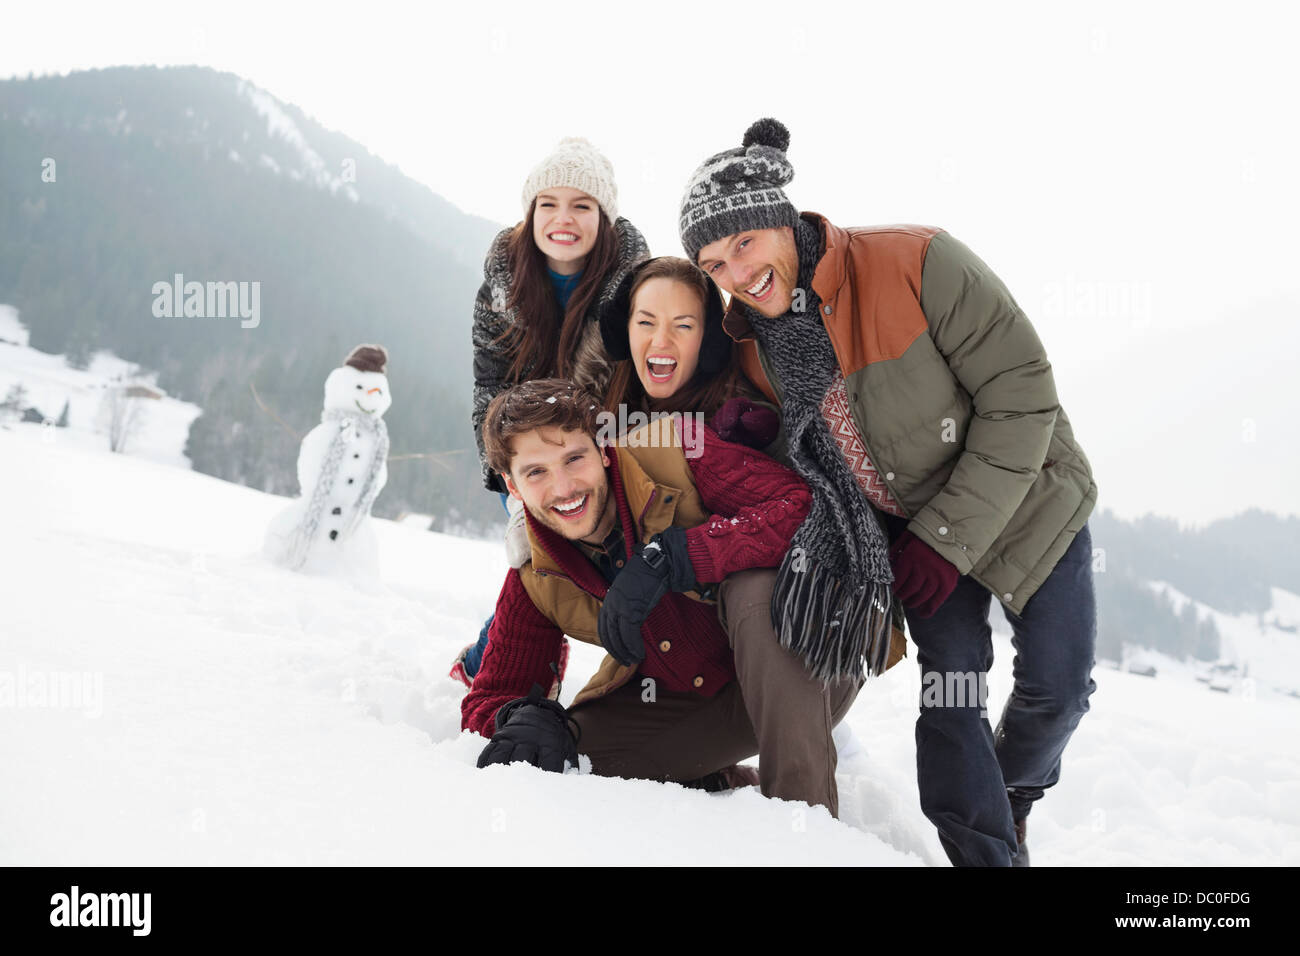 Portrait of happy friends in snowy field with snowman Banque D'Images